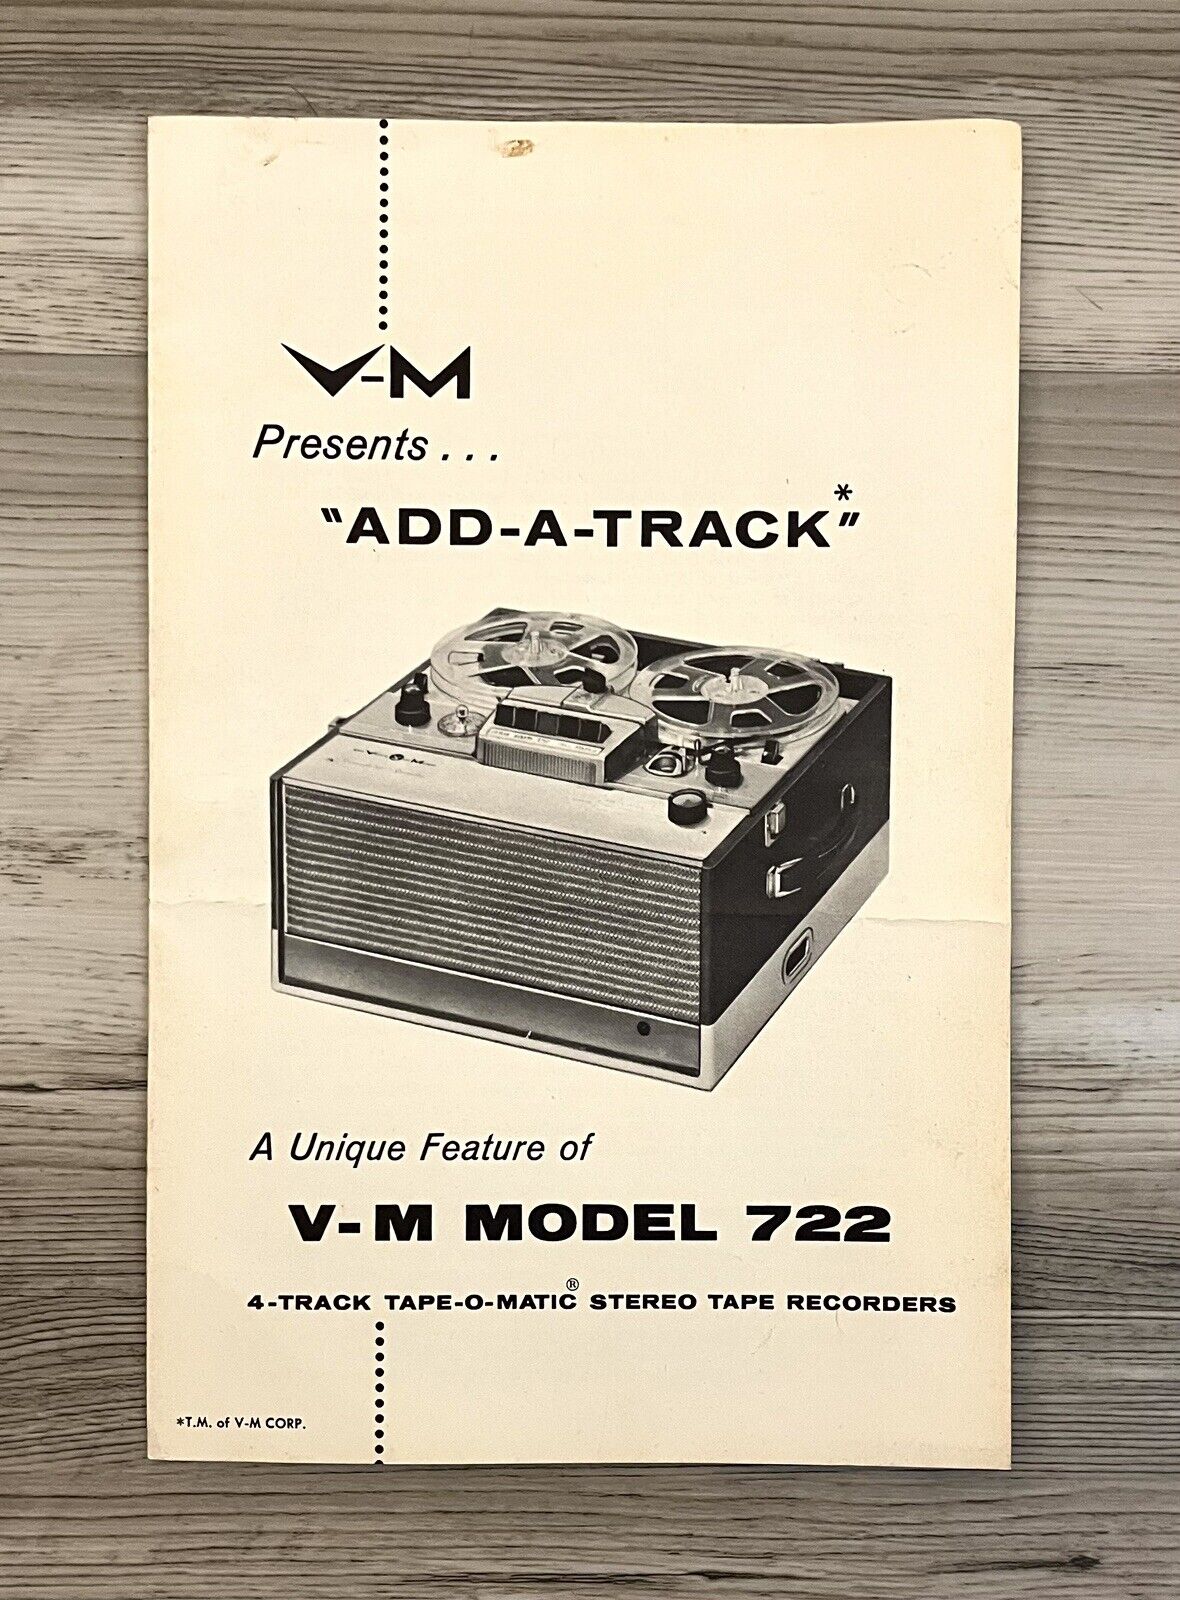 V-M Model 722 Stereo Tape Recorder 4-Track Operating Manual “Add-A-Track”